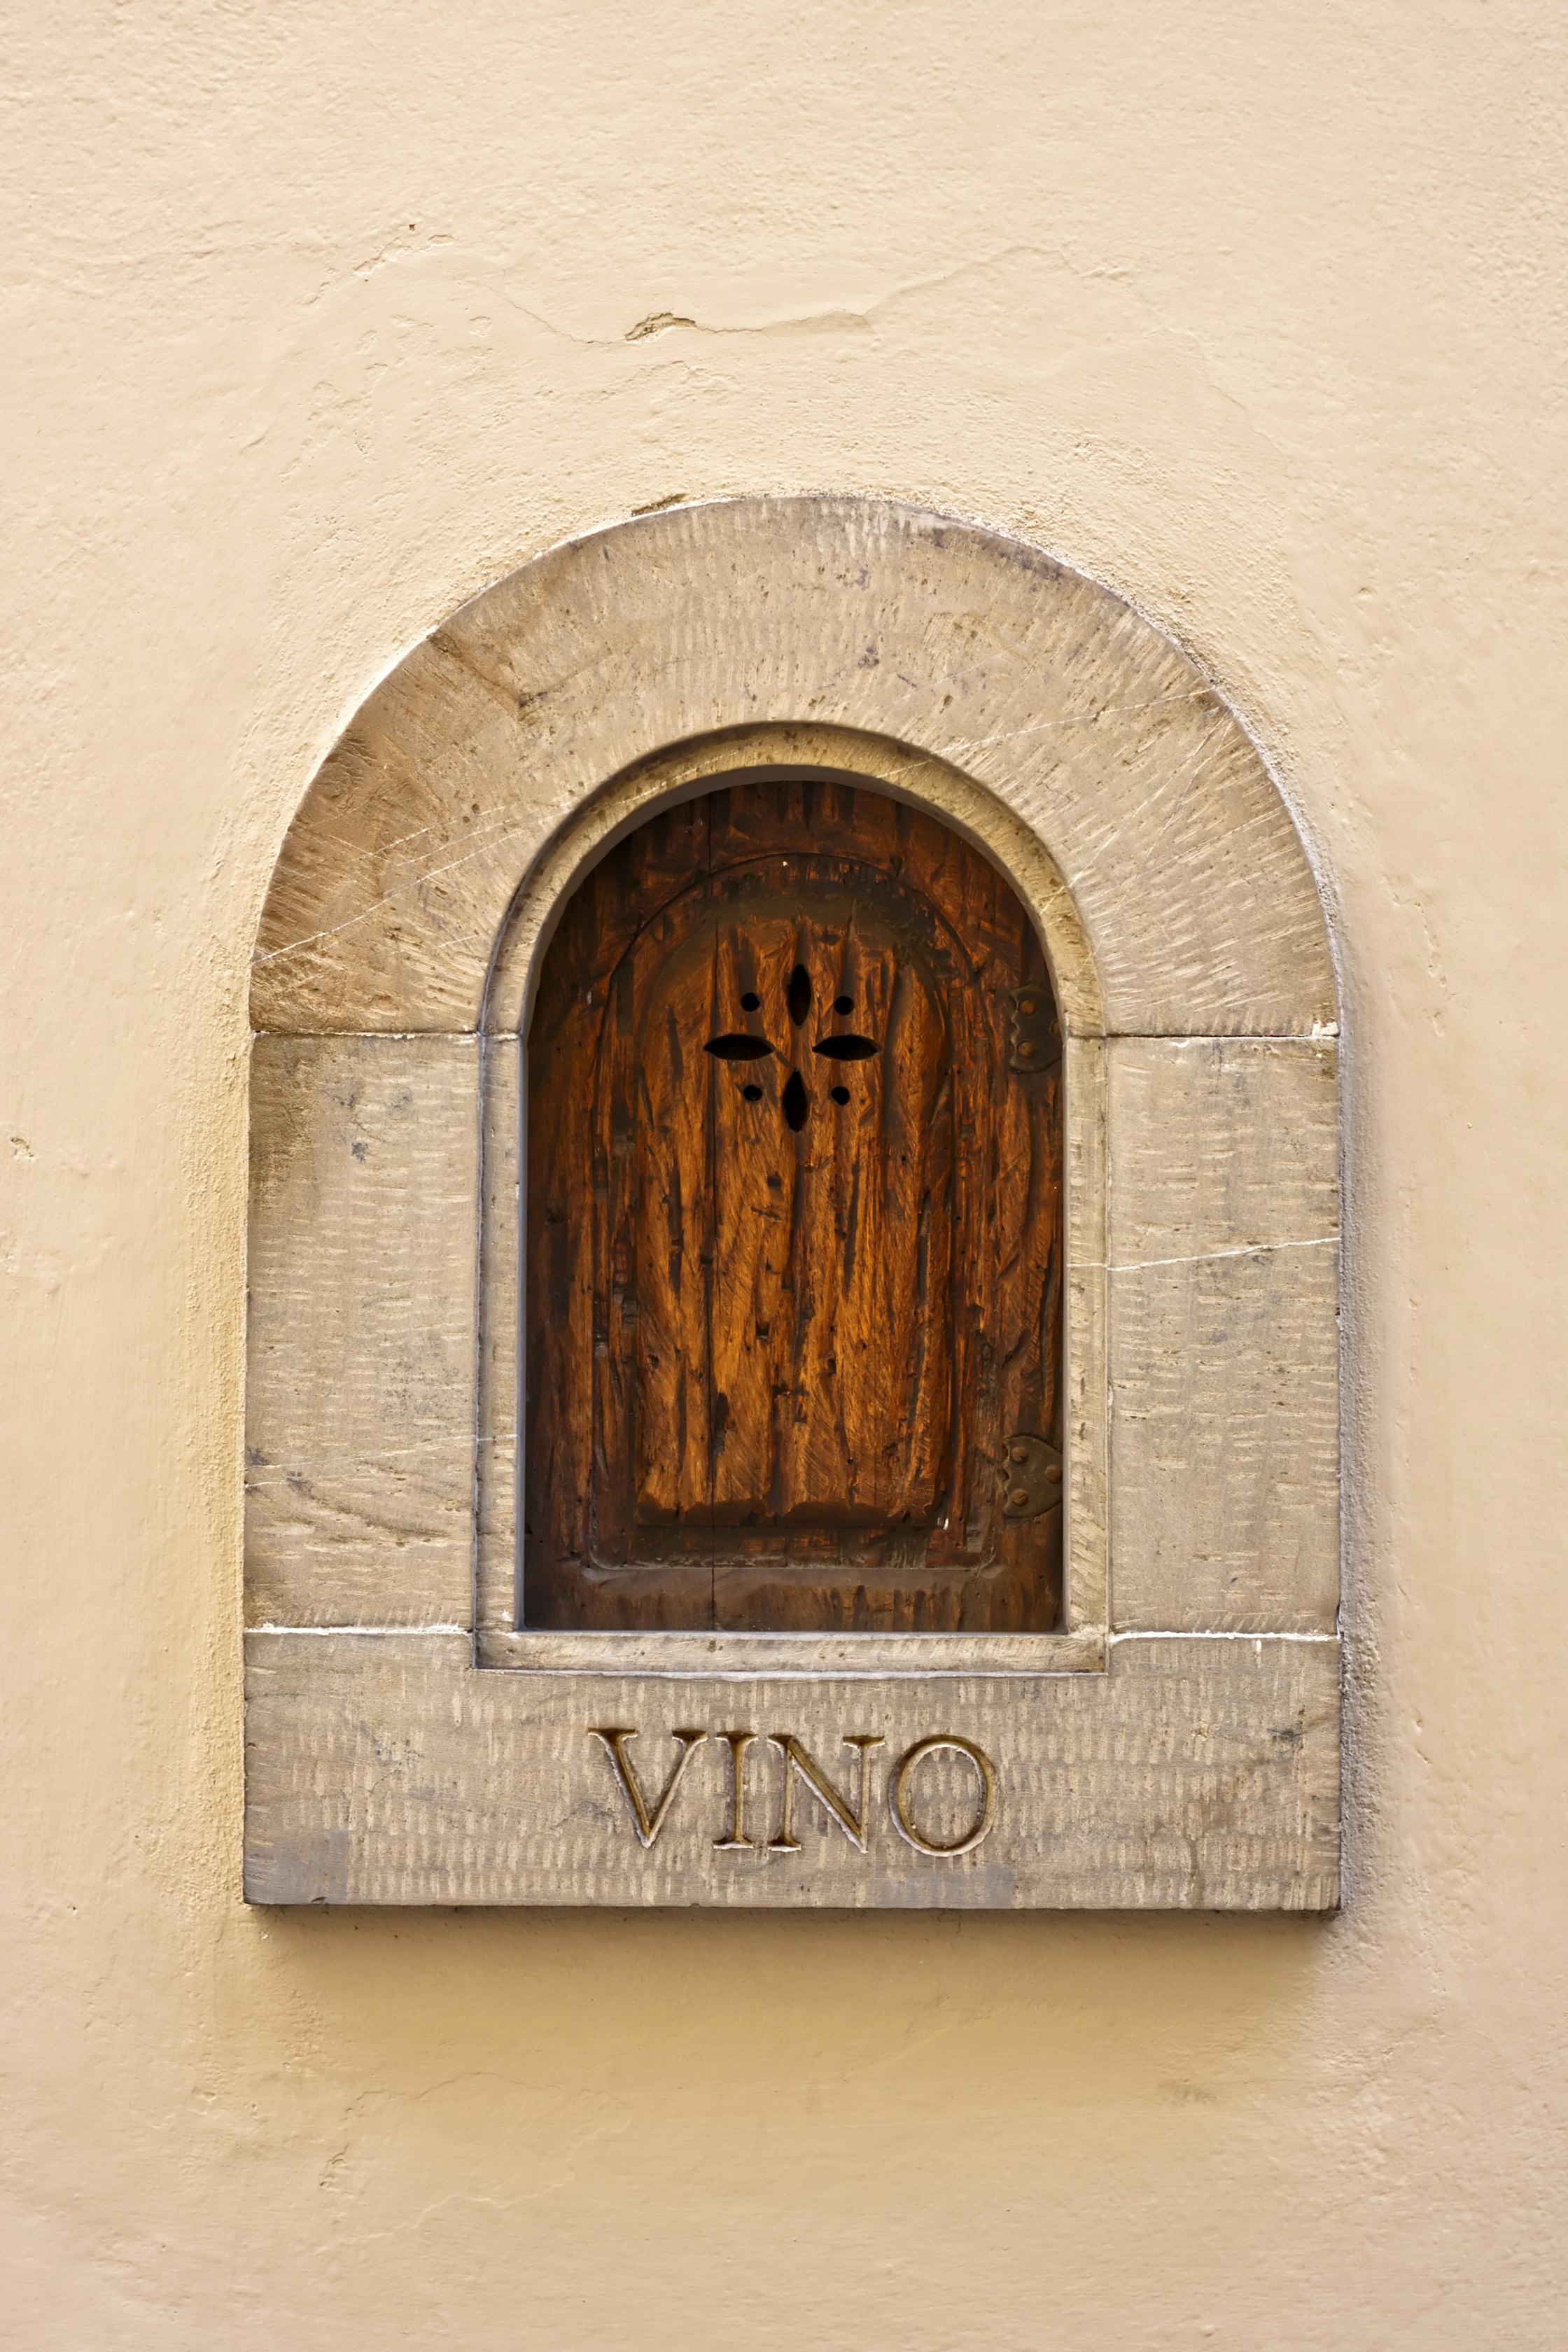 Small Wooden Window for Wine in Florence, Italy